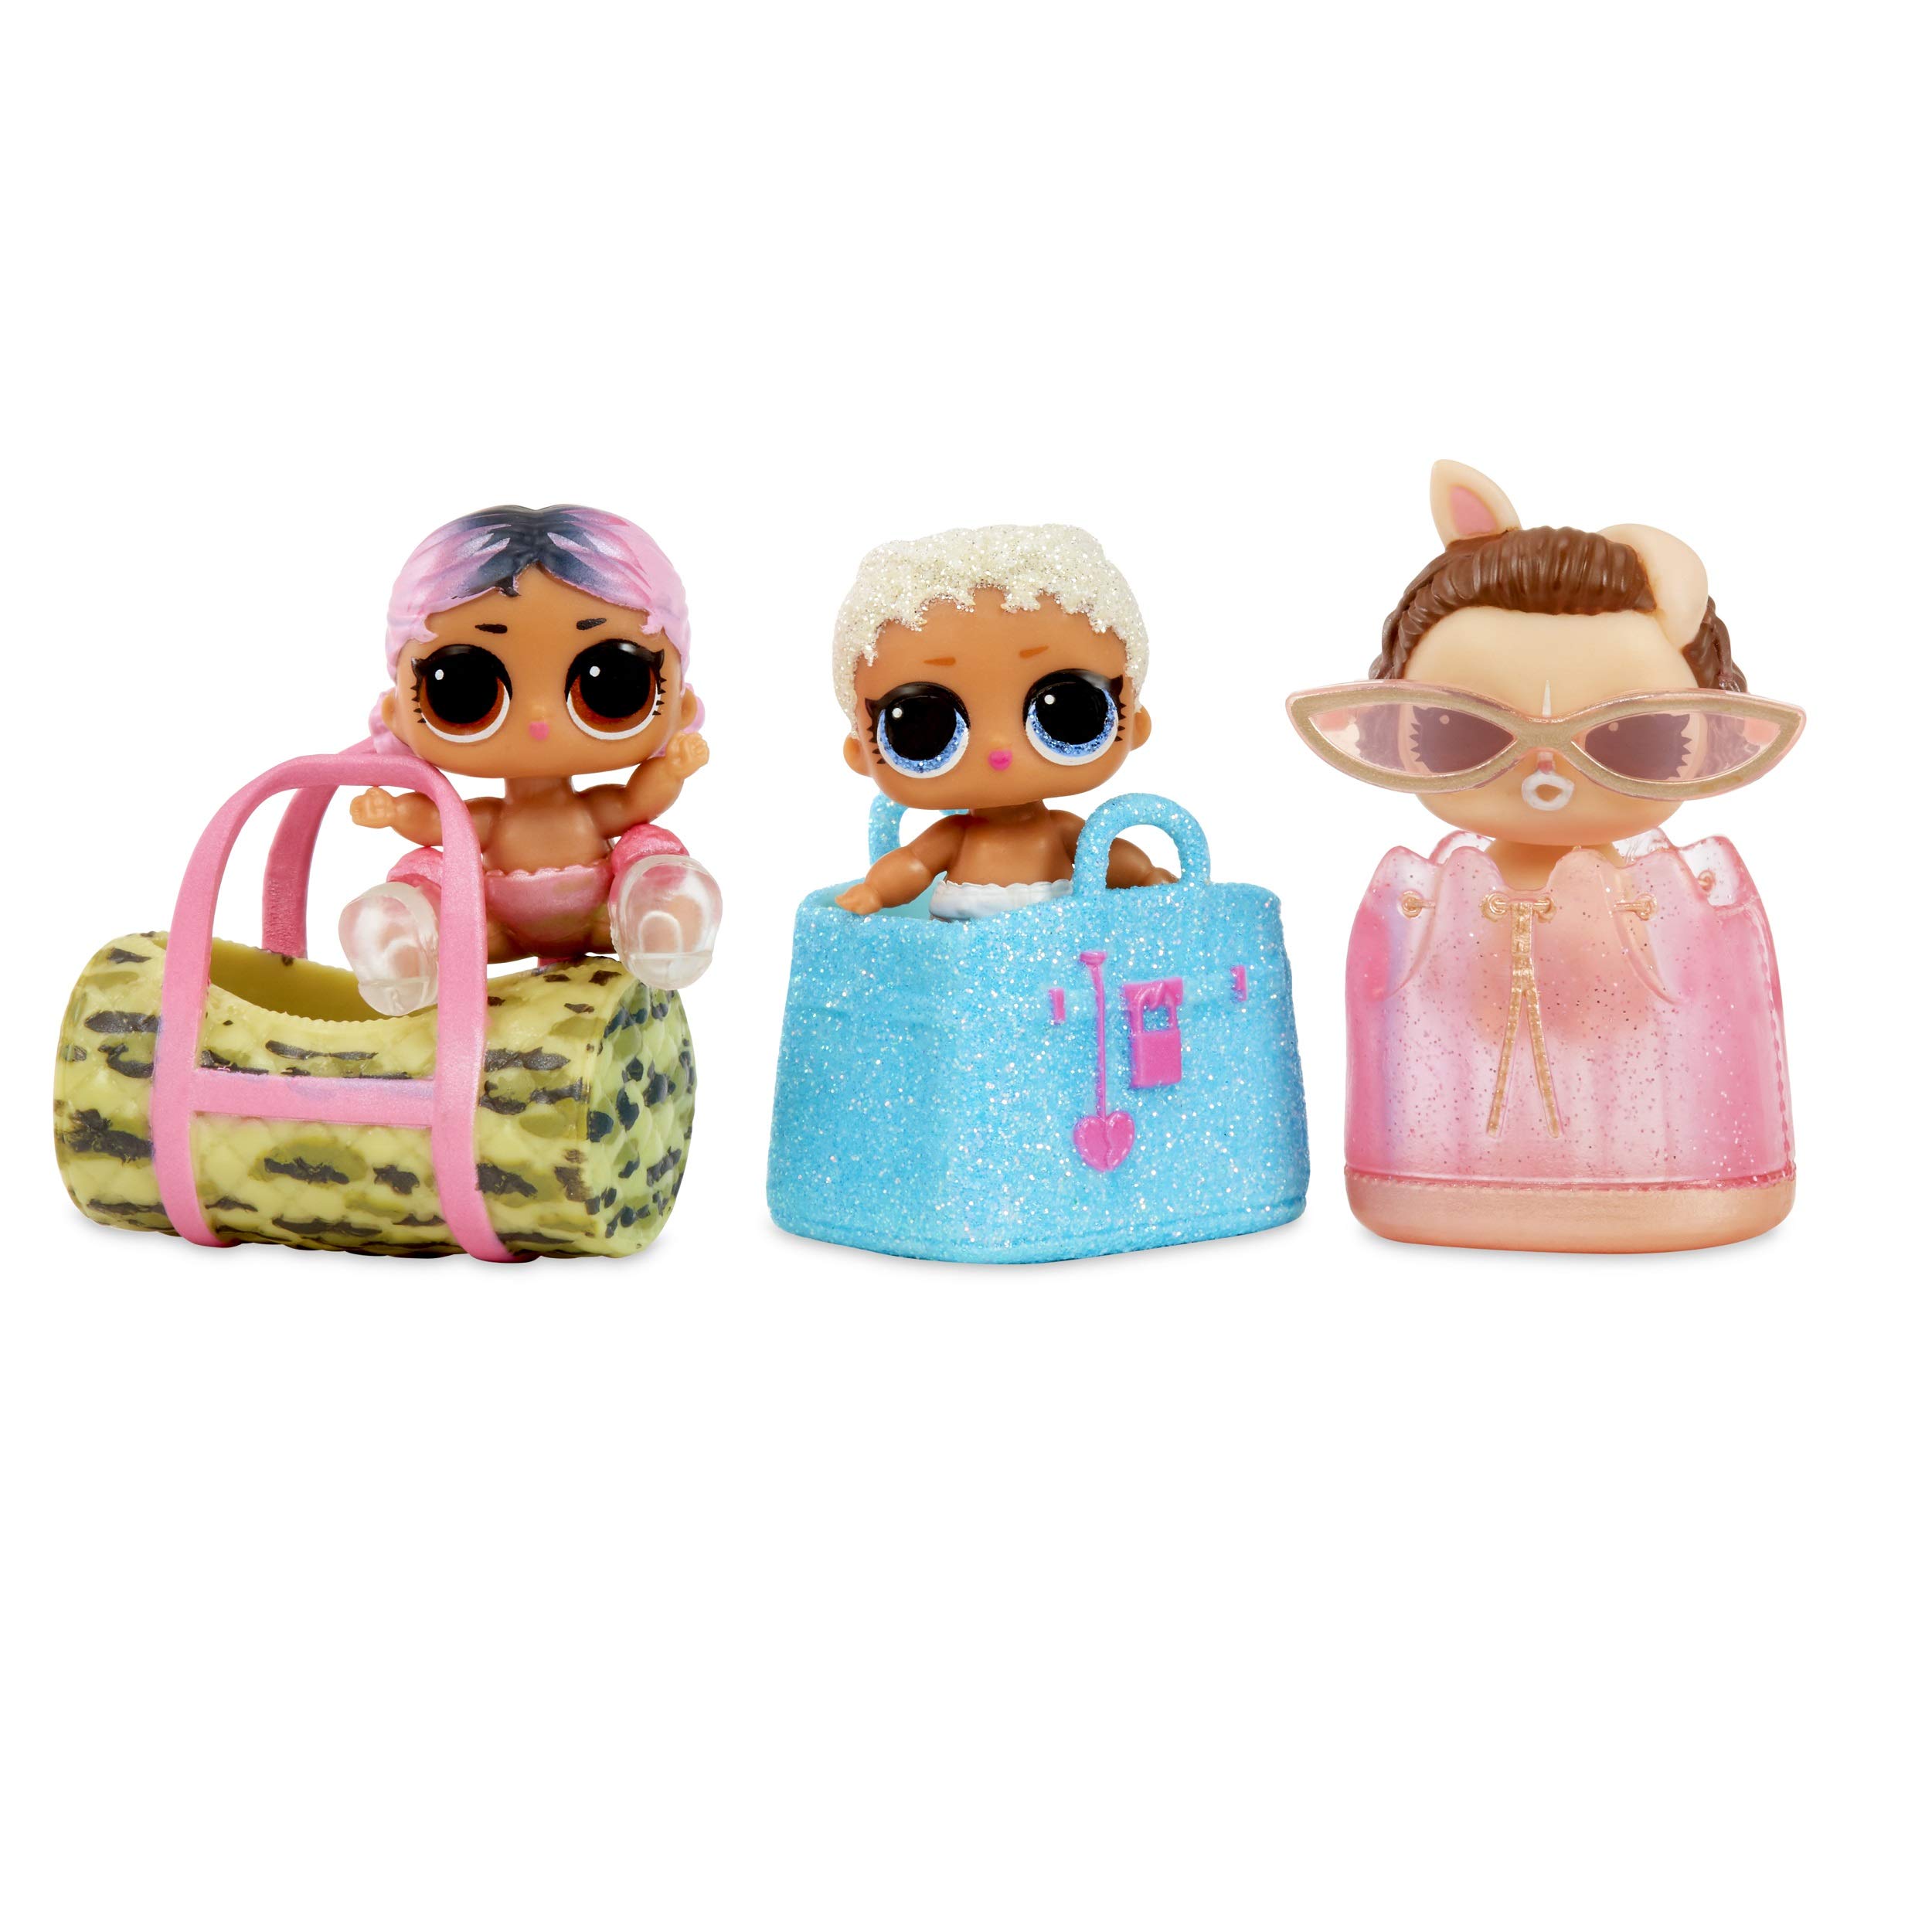 L.O.L. Surprise! Lils with Lil Pets Or Sisters - 2 Pack